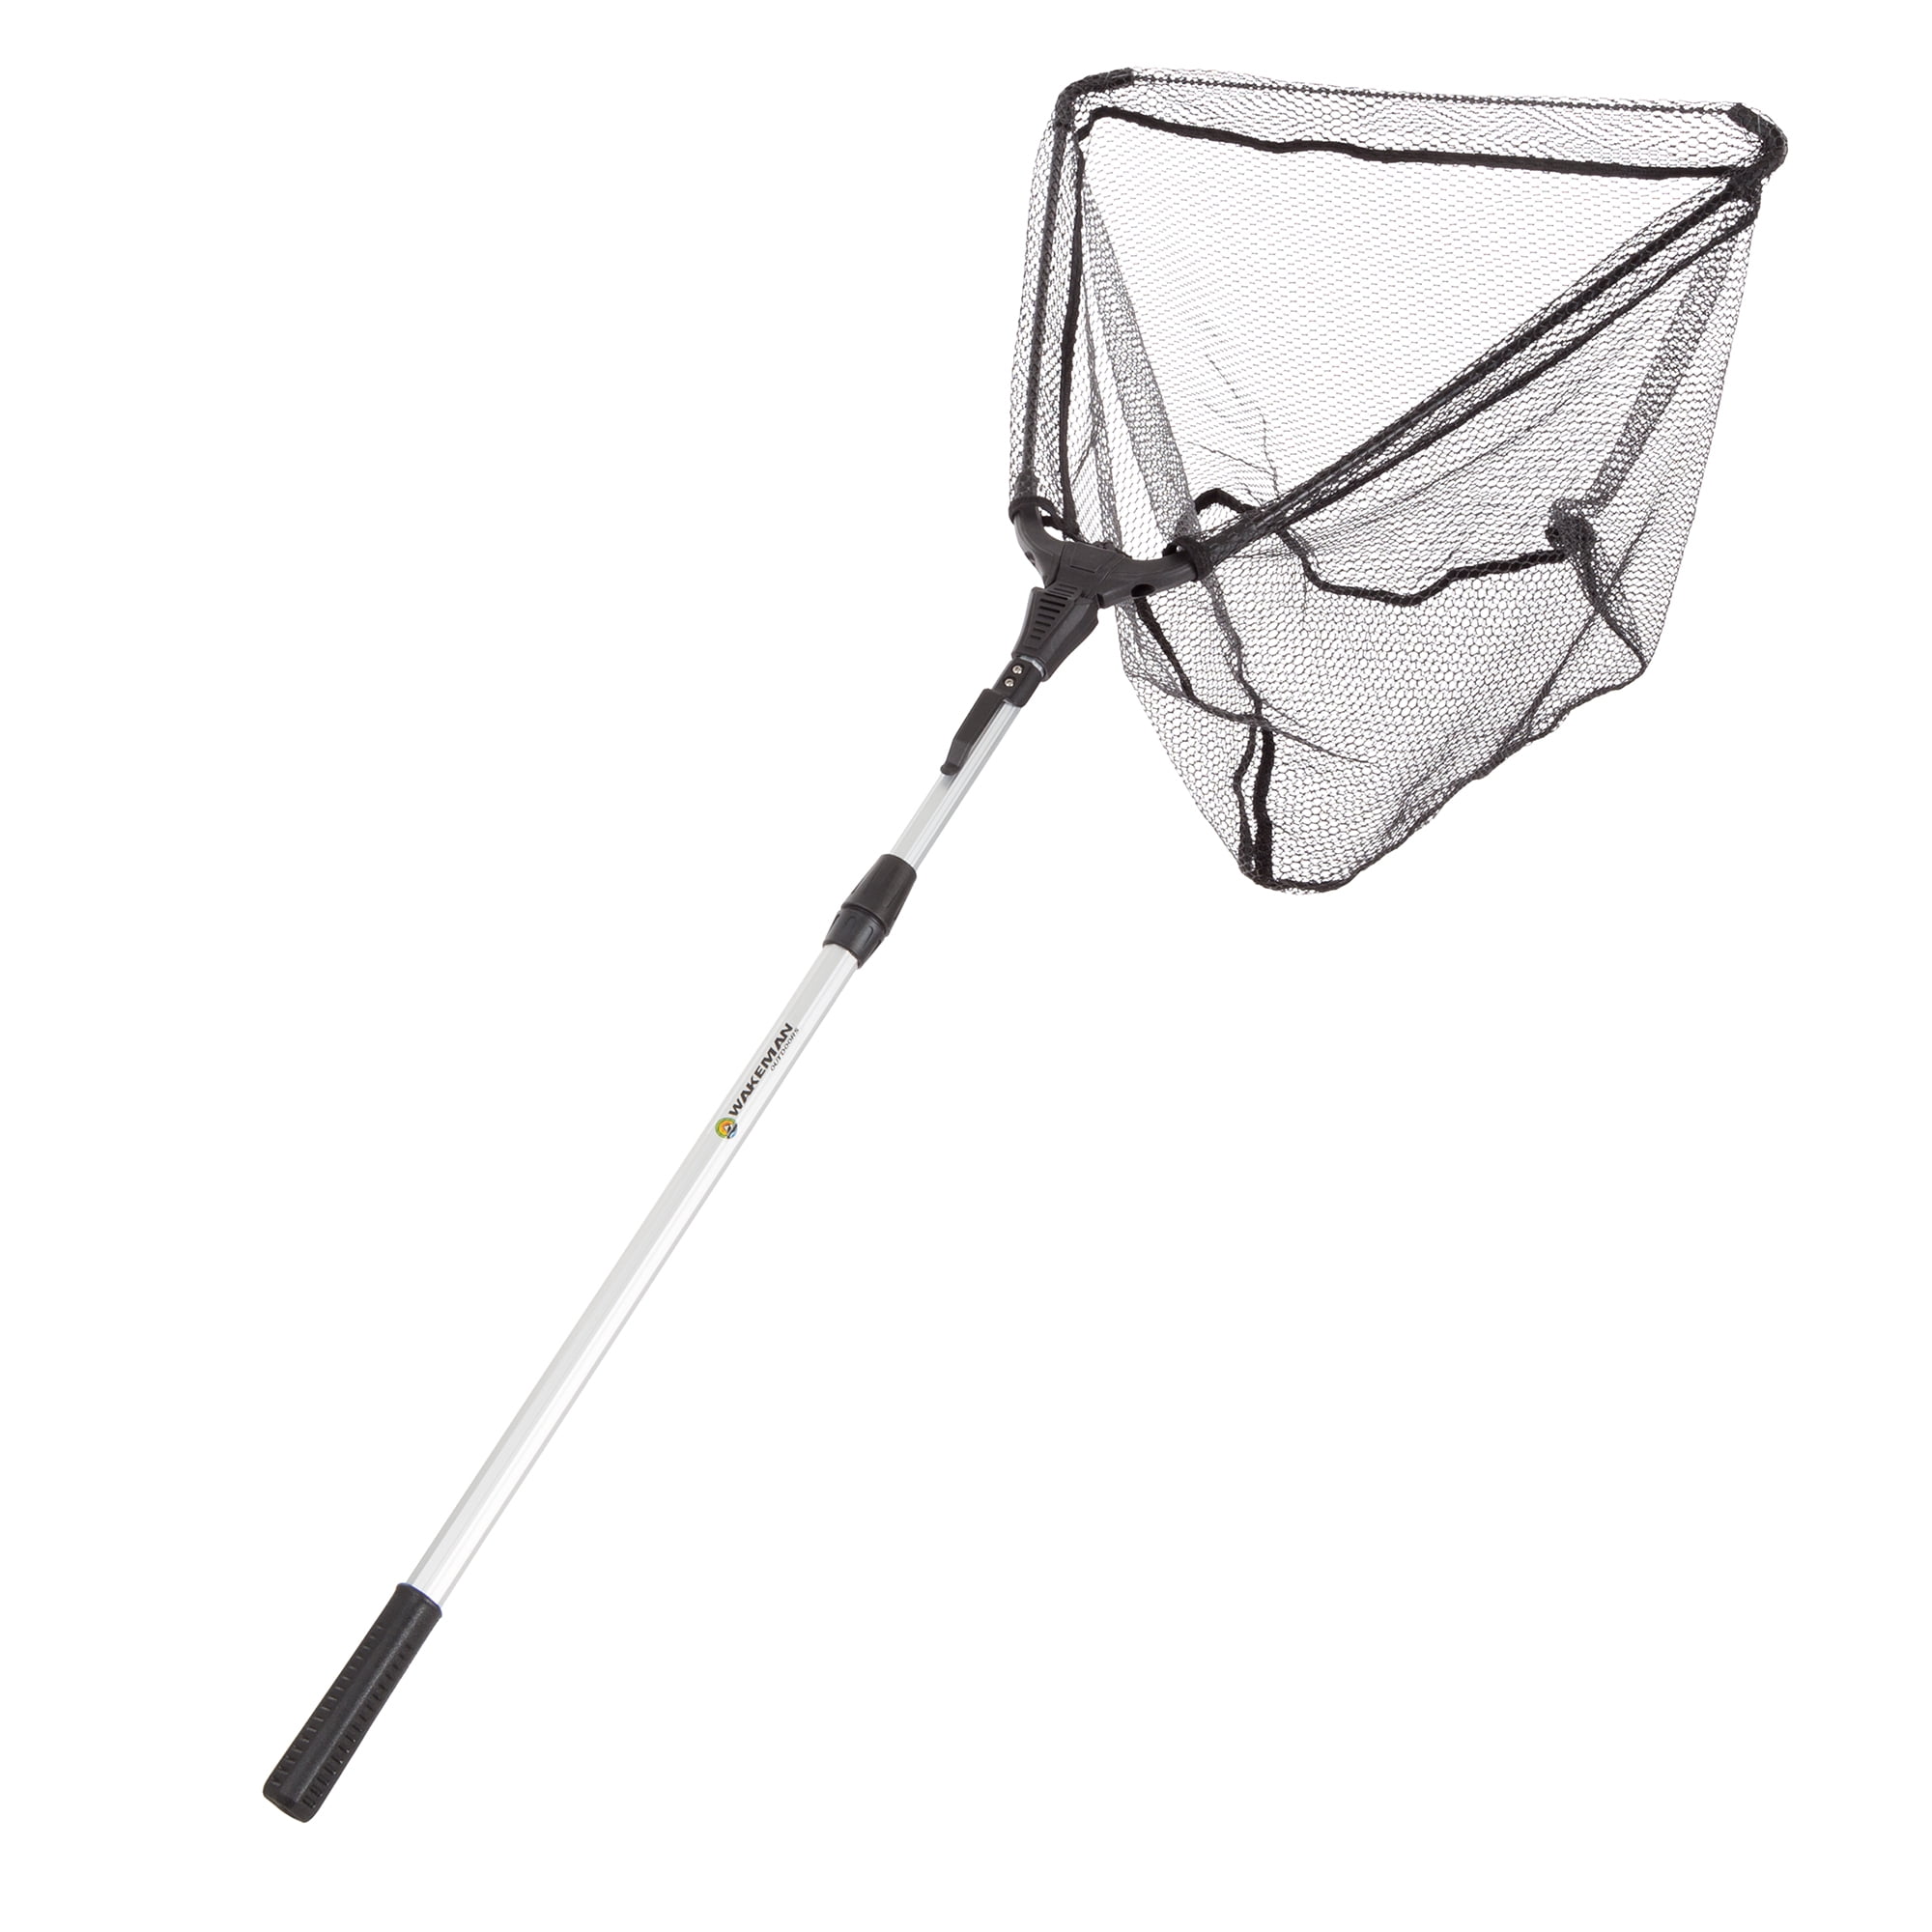 Wakeman Fishing Net with Telescoping Handle- Collapsible and